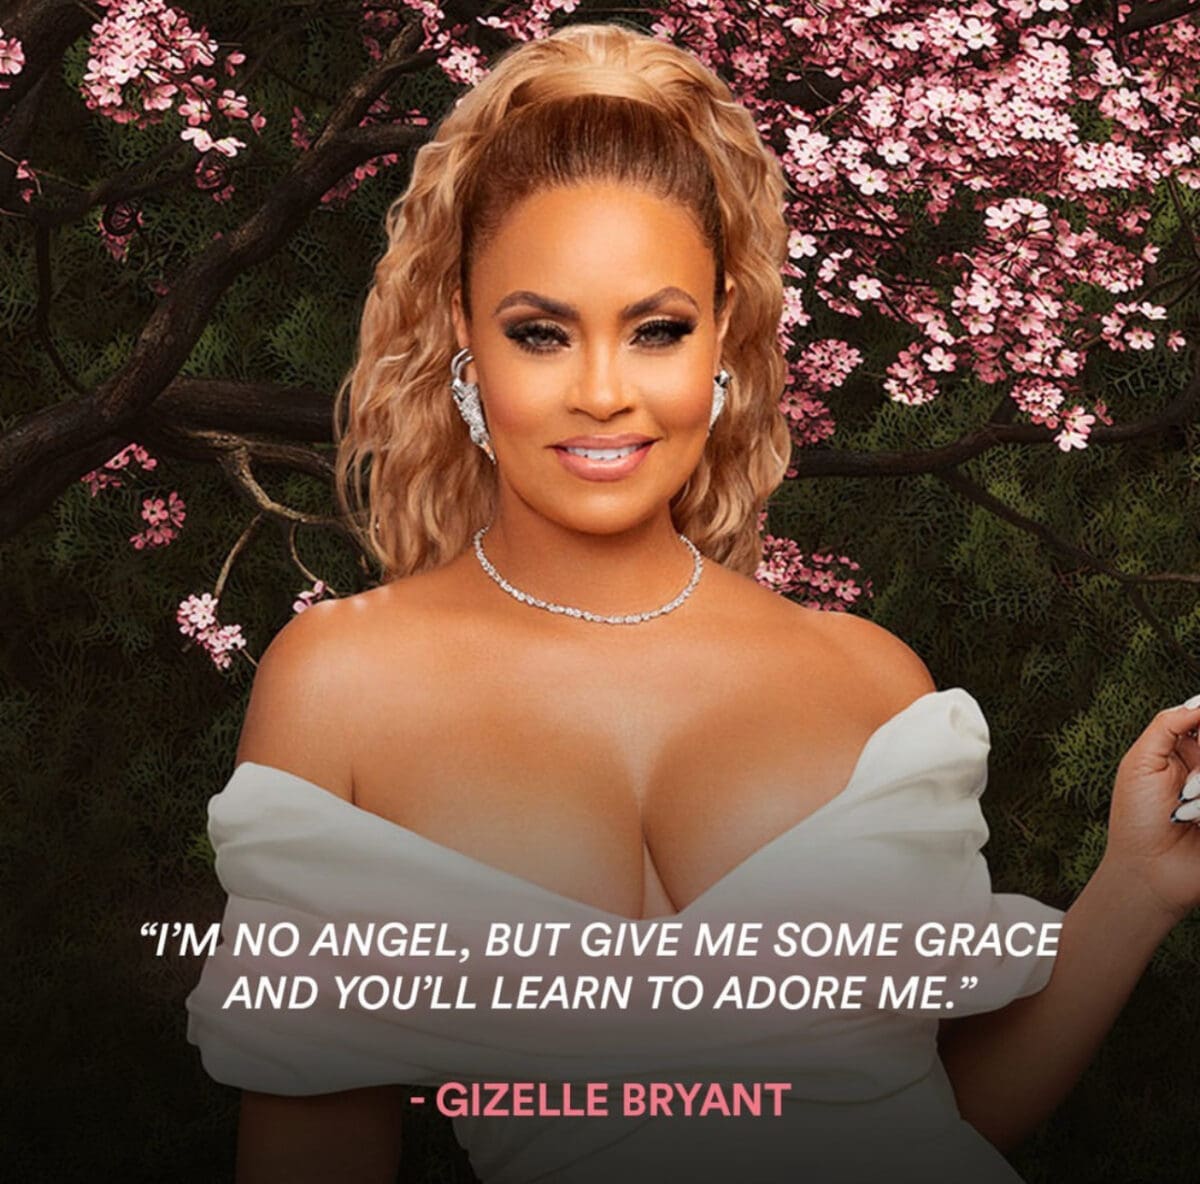 The Real Housewives of Potomac OG honors her three daughters with her season 8 tagline.